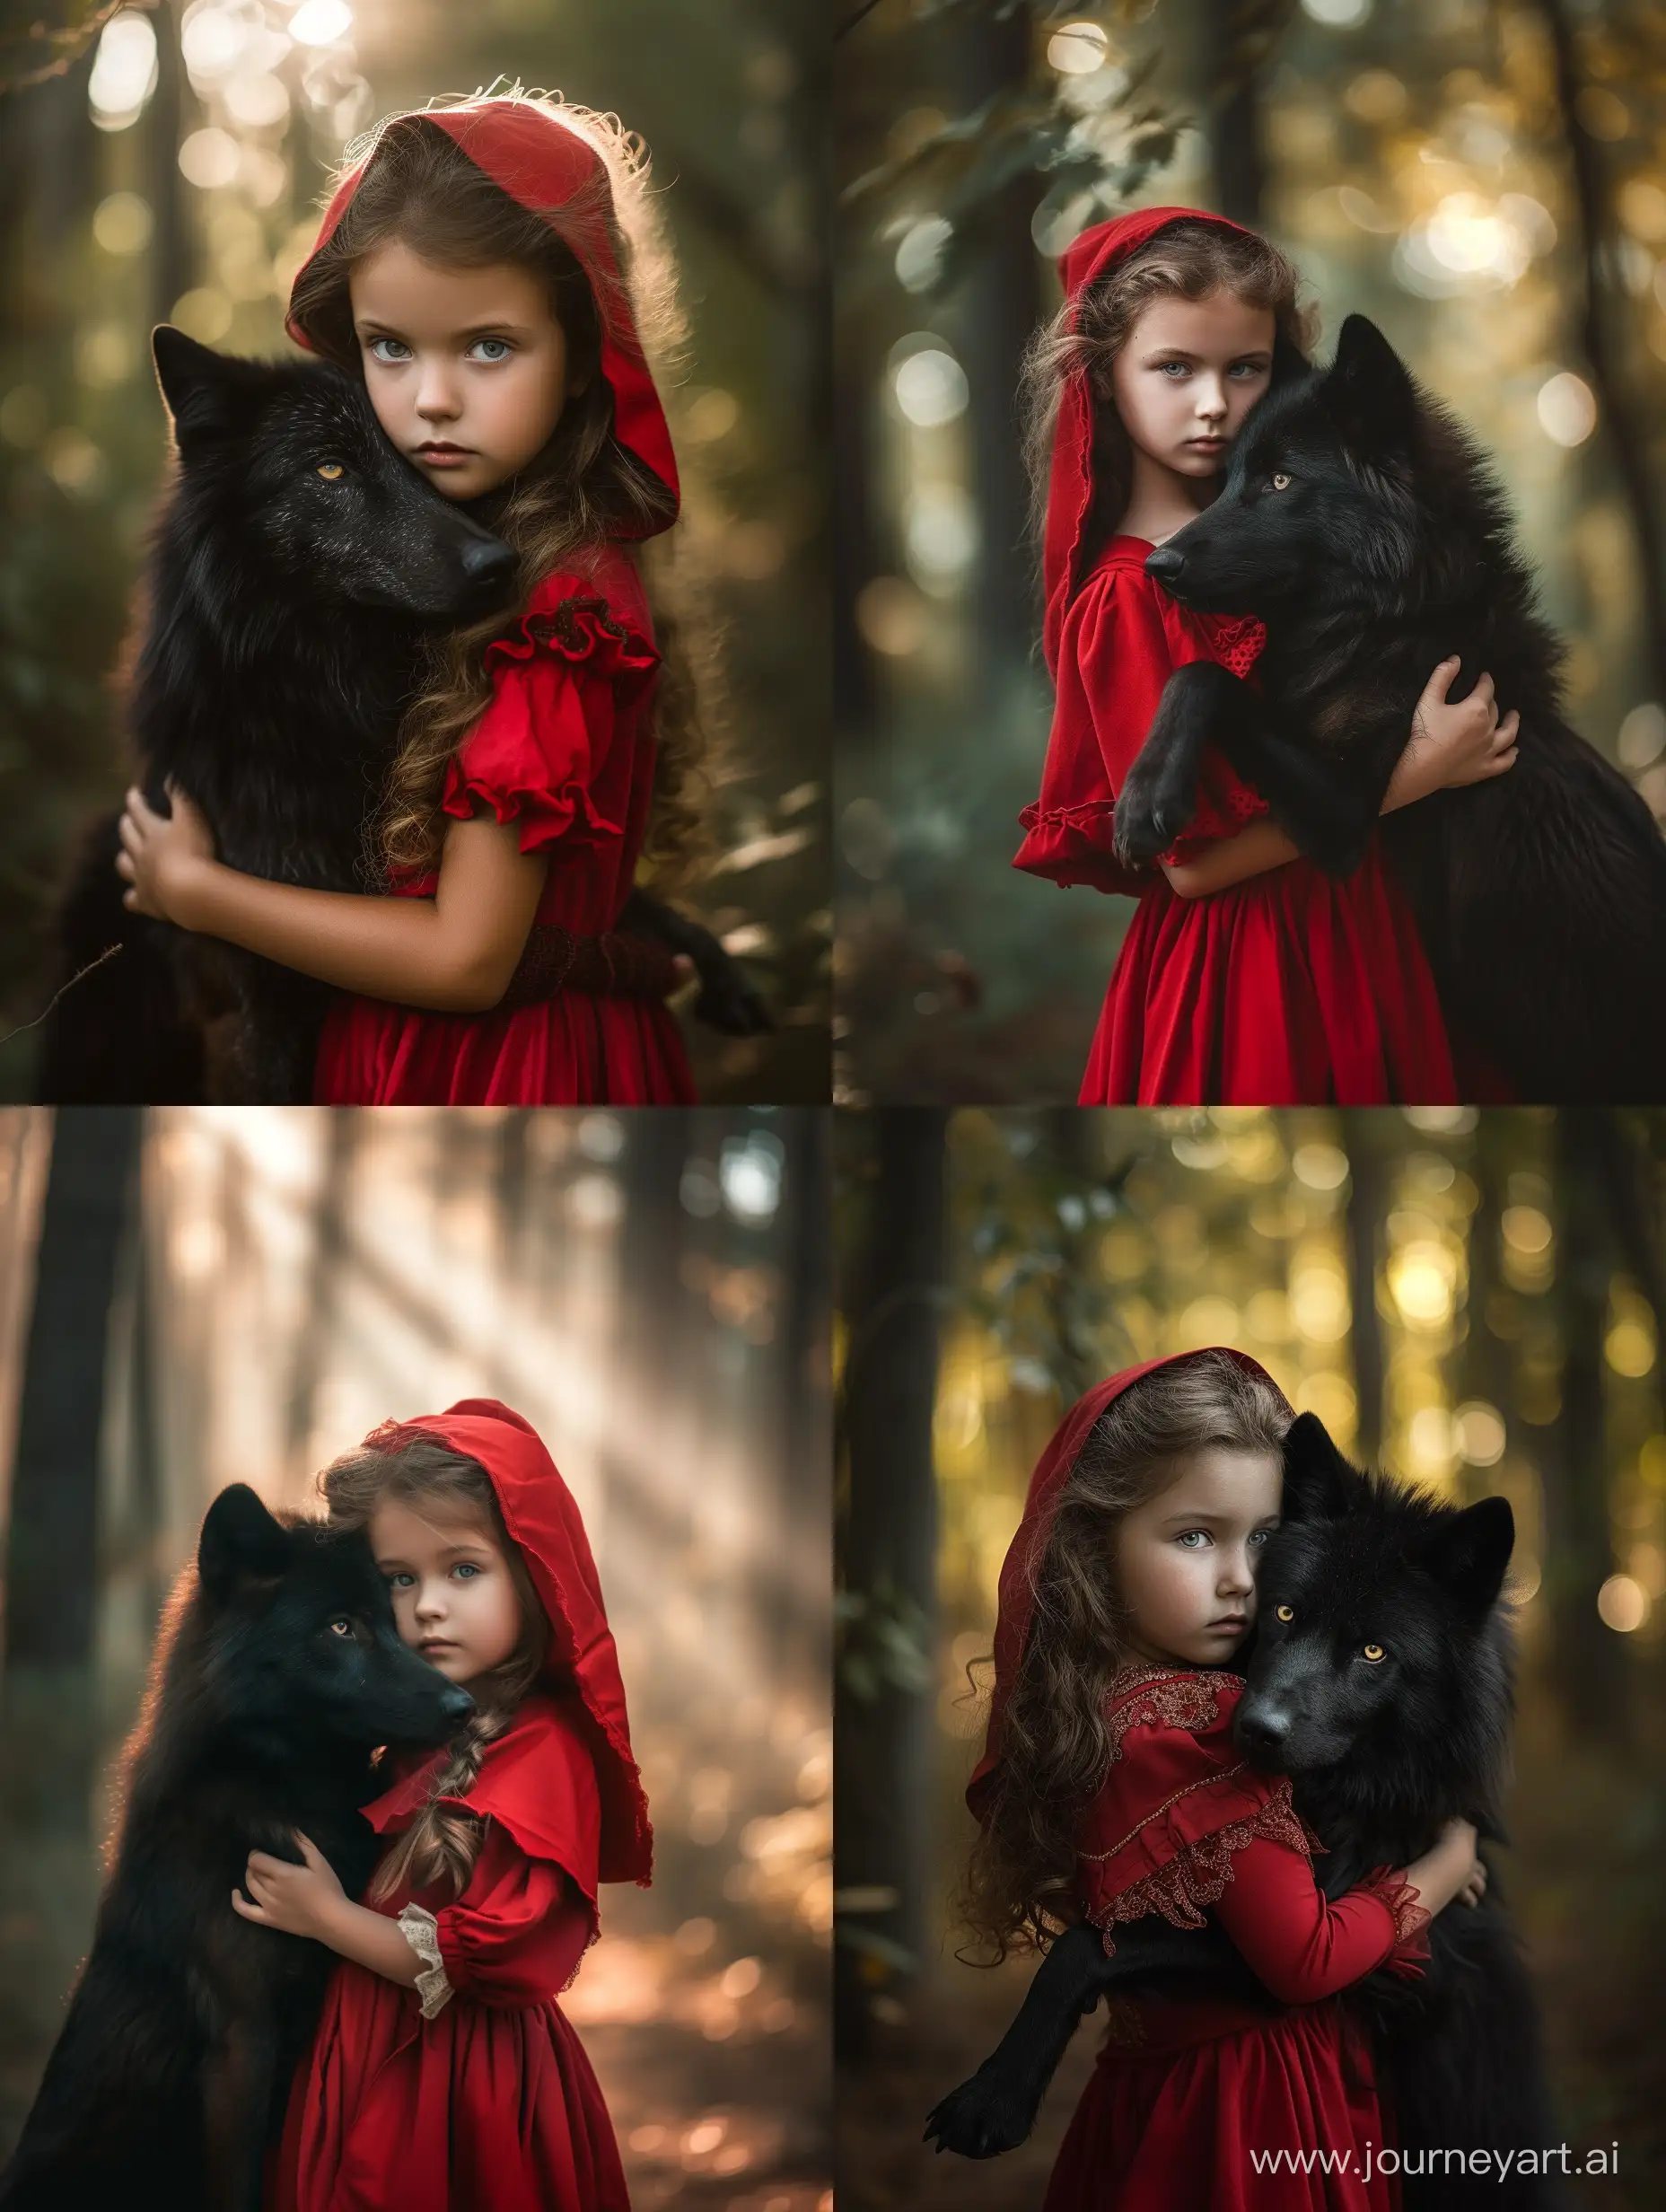 little red riding hood, pretty young girl, holds the black wolf in her arms, forest, light passing through the trees,realisticPortrait Photography, high quality photograph, In the style of Luis royo —style raw